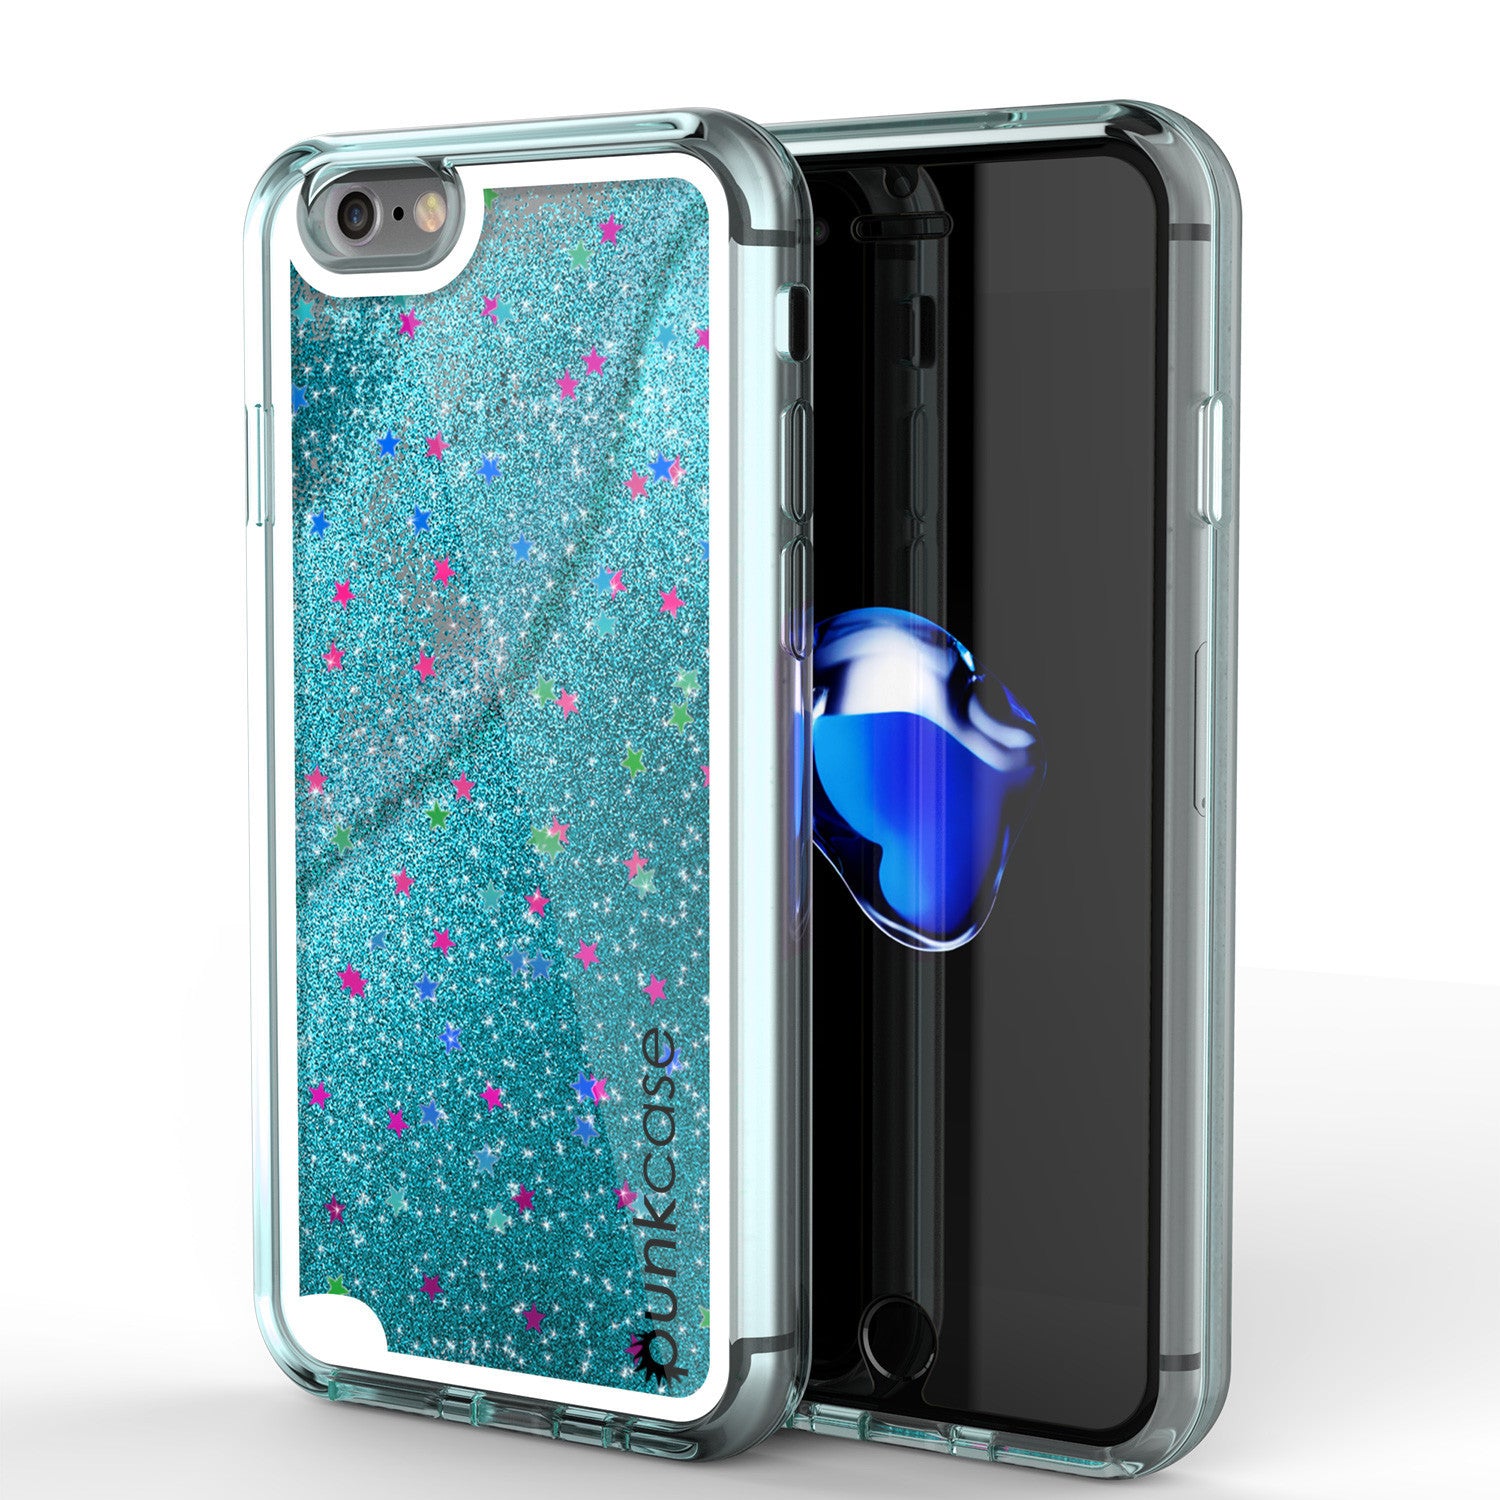 iPhone 7 Case, PunkCase LIQUID Teal Series, Protective Dual Layer Floating Glitter Cover (Color in image: teal)